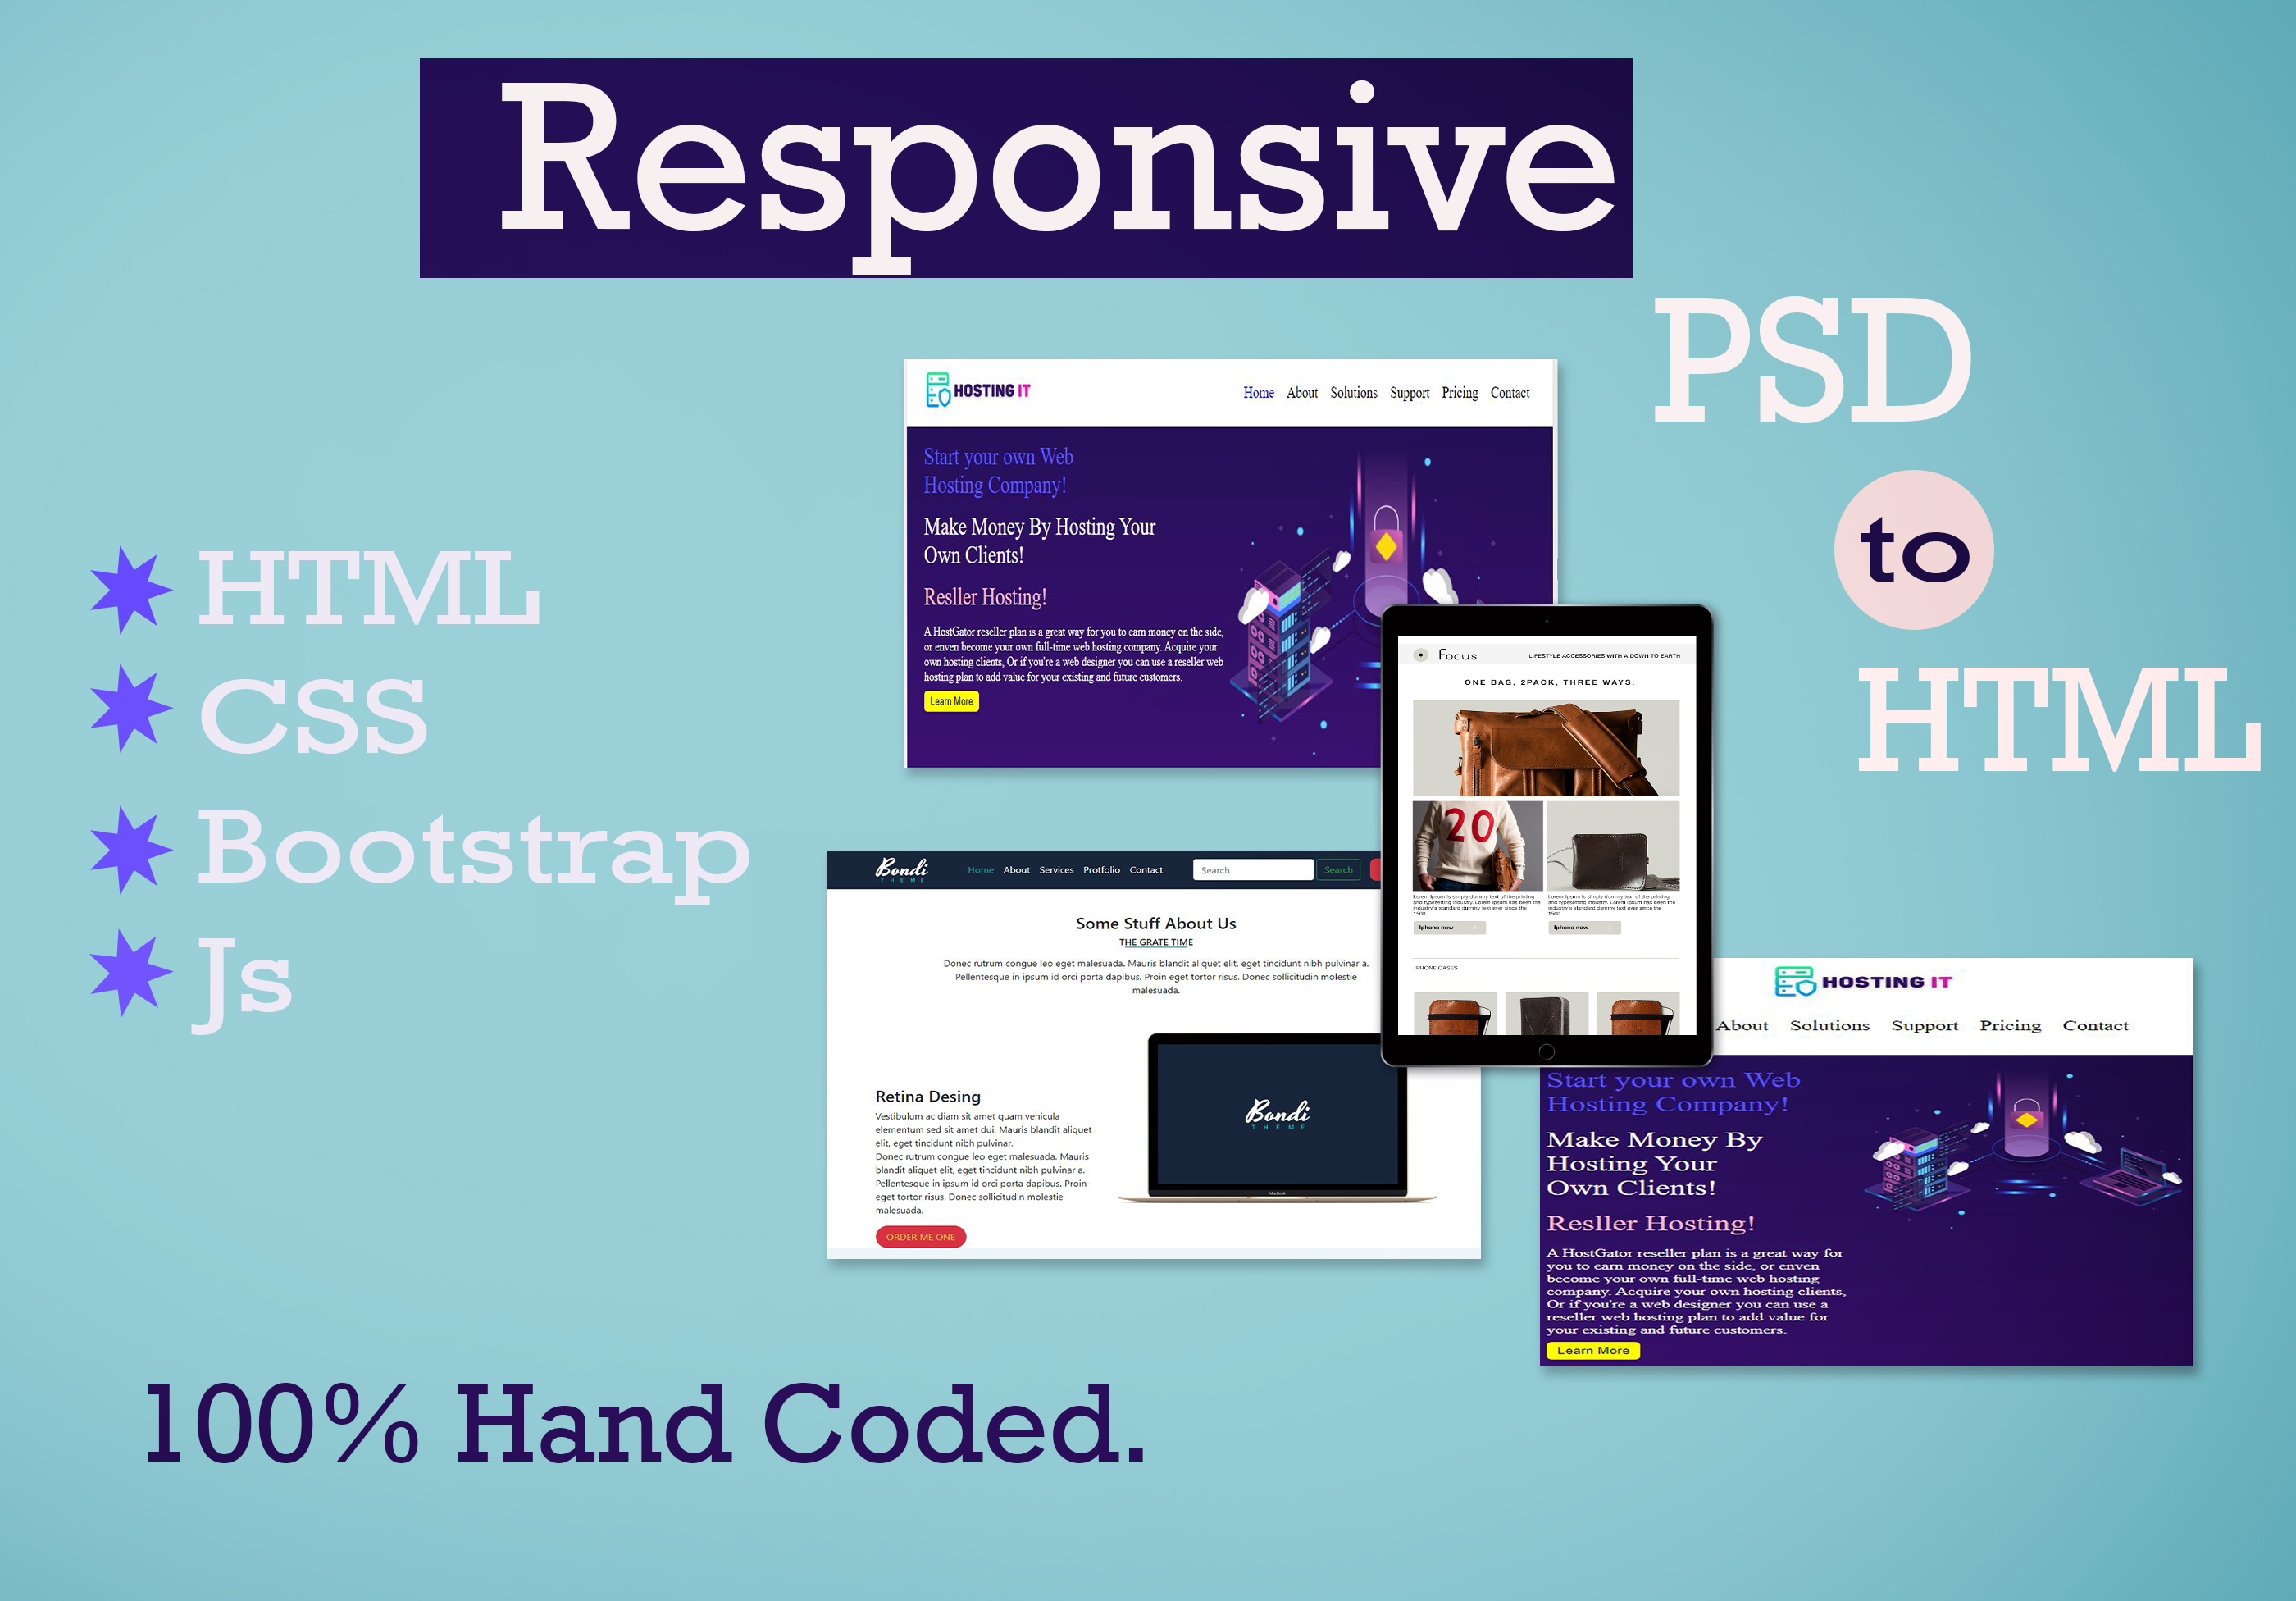 Convert PSD to HTML with Responsive webpage. Html. Css, Bootstrap, js